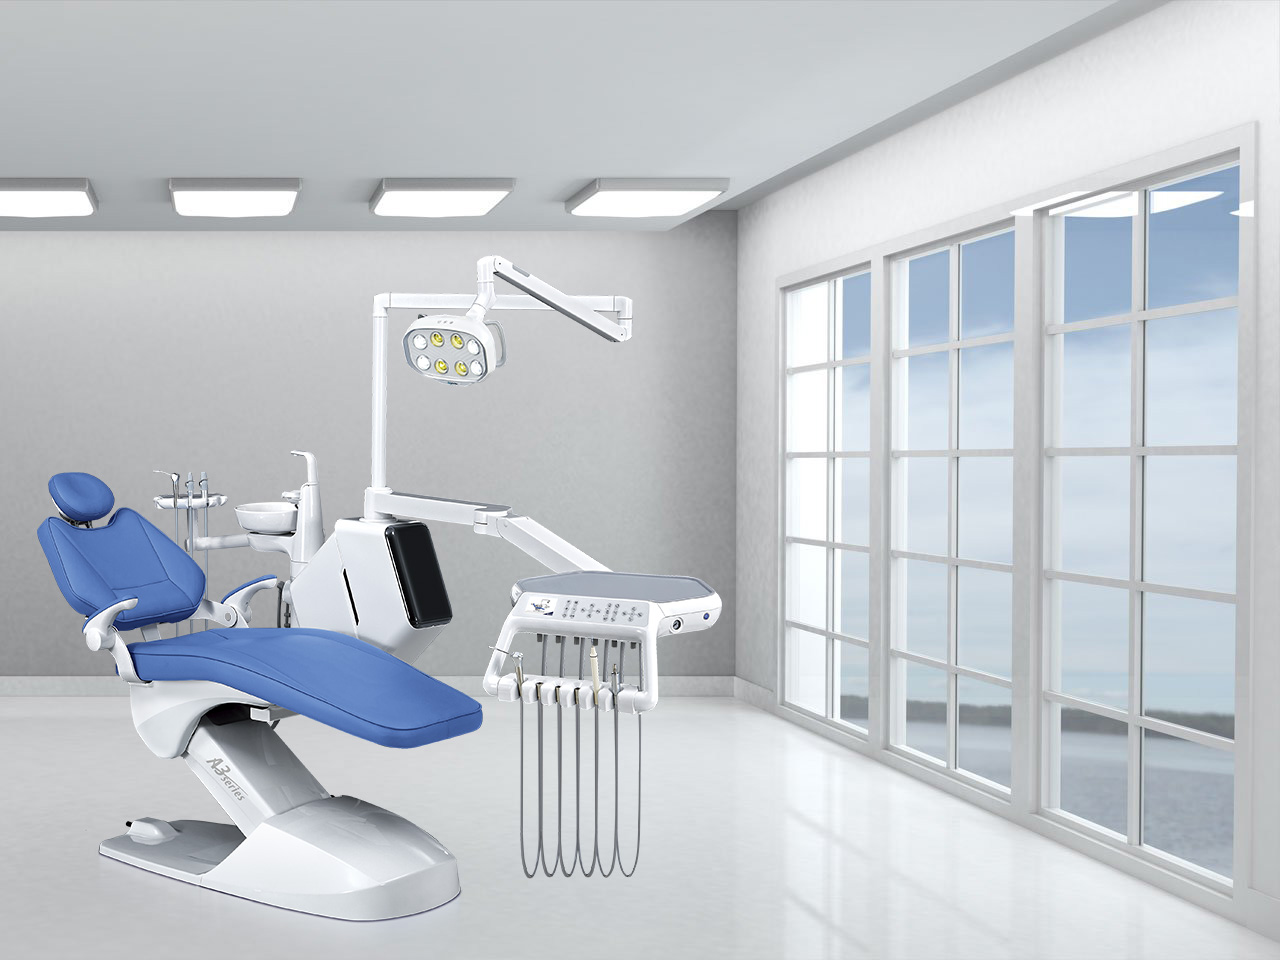 About the flagship A3 dental chair of the appearance